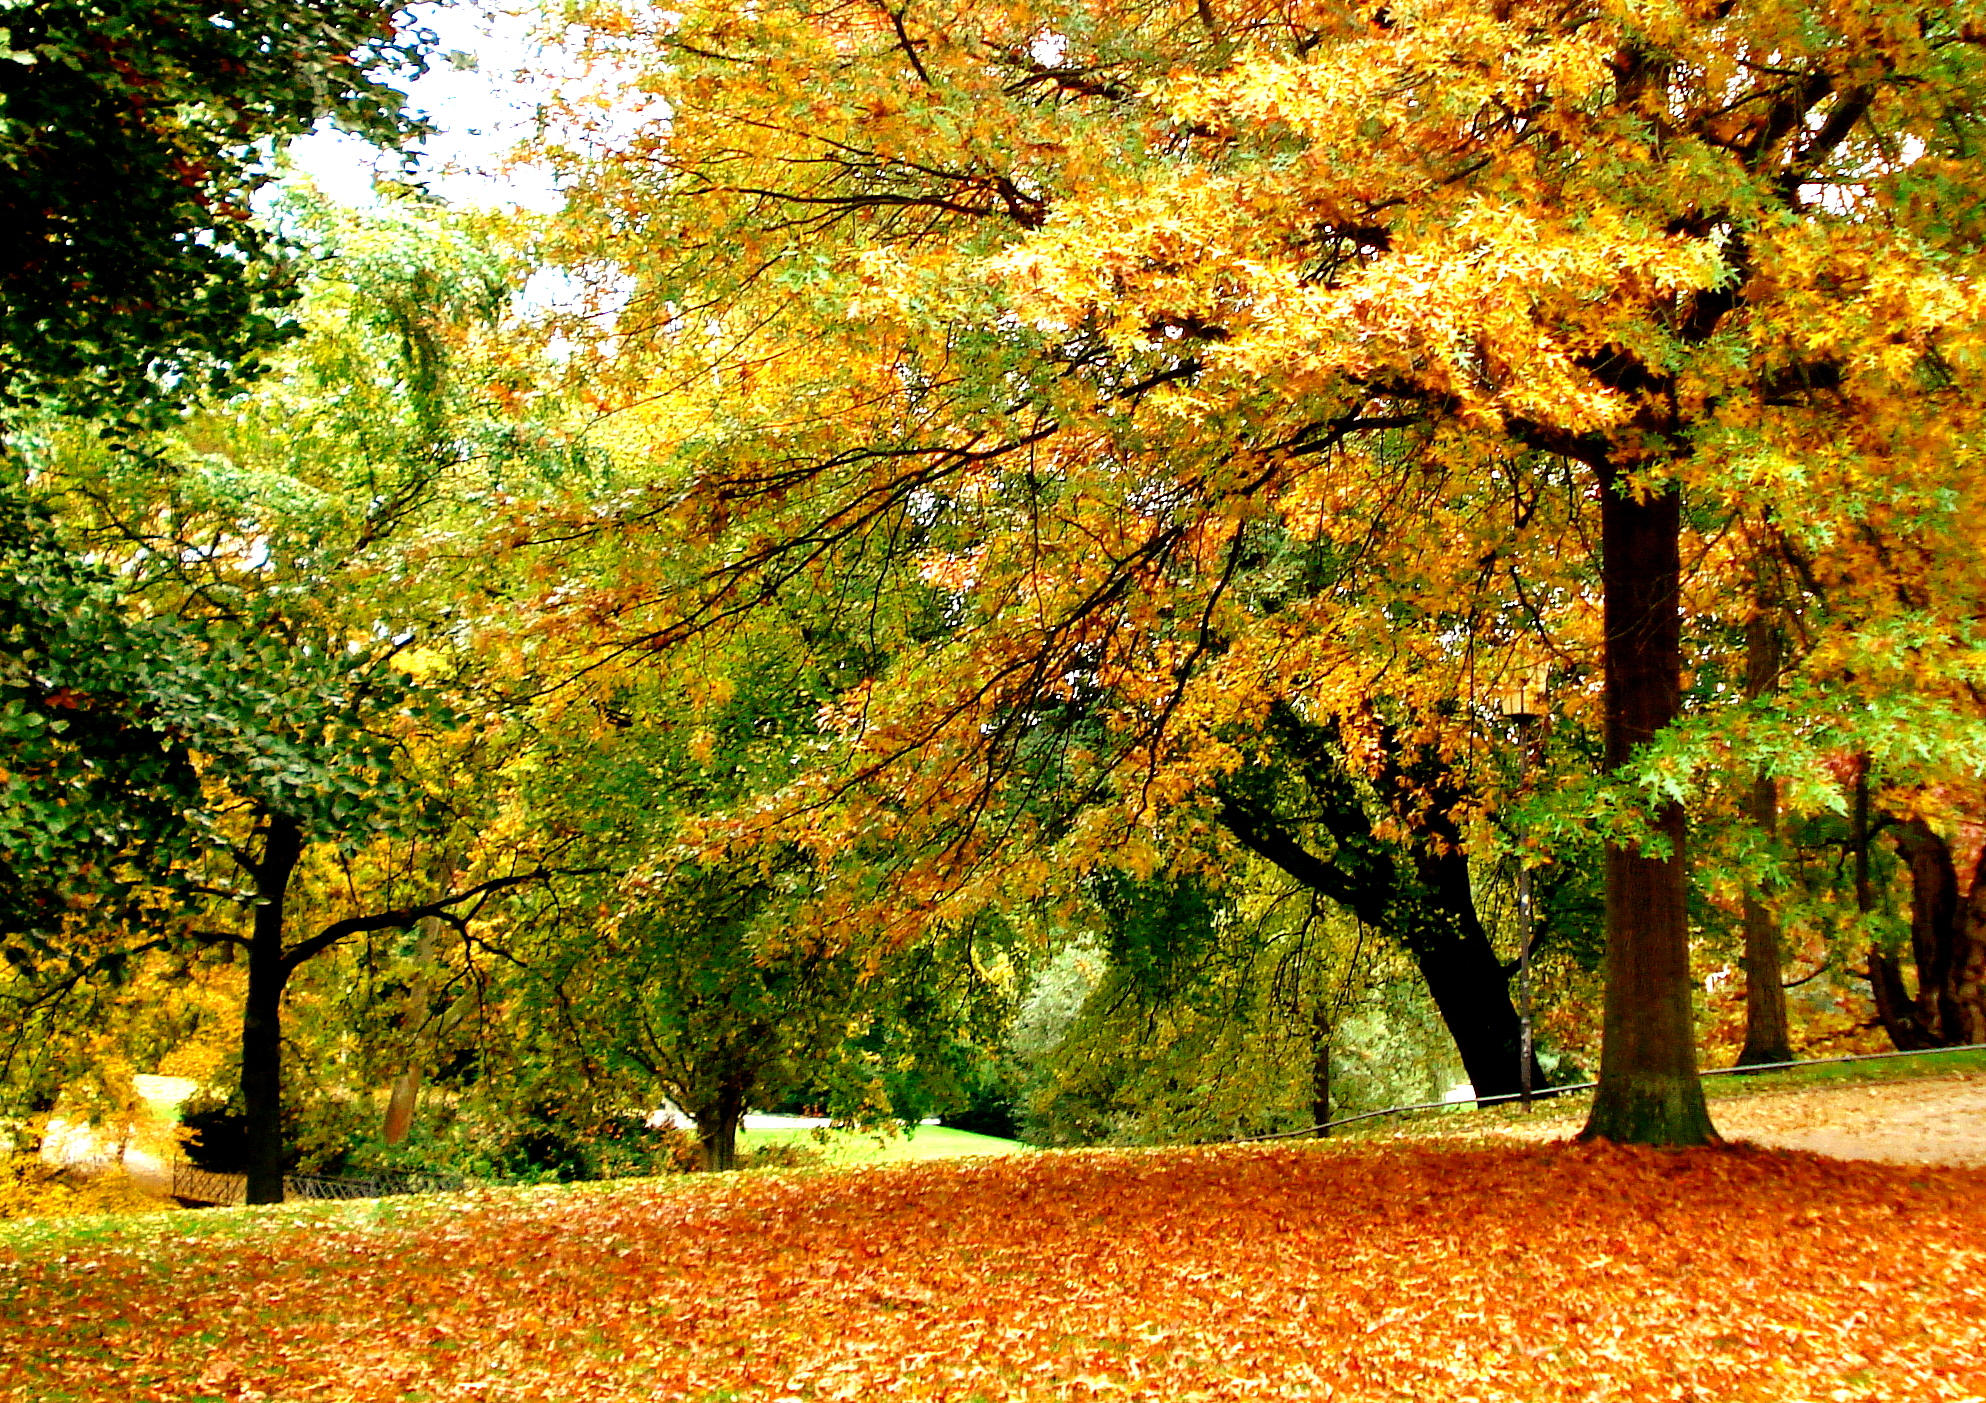 widescreen falling leaves image